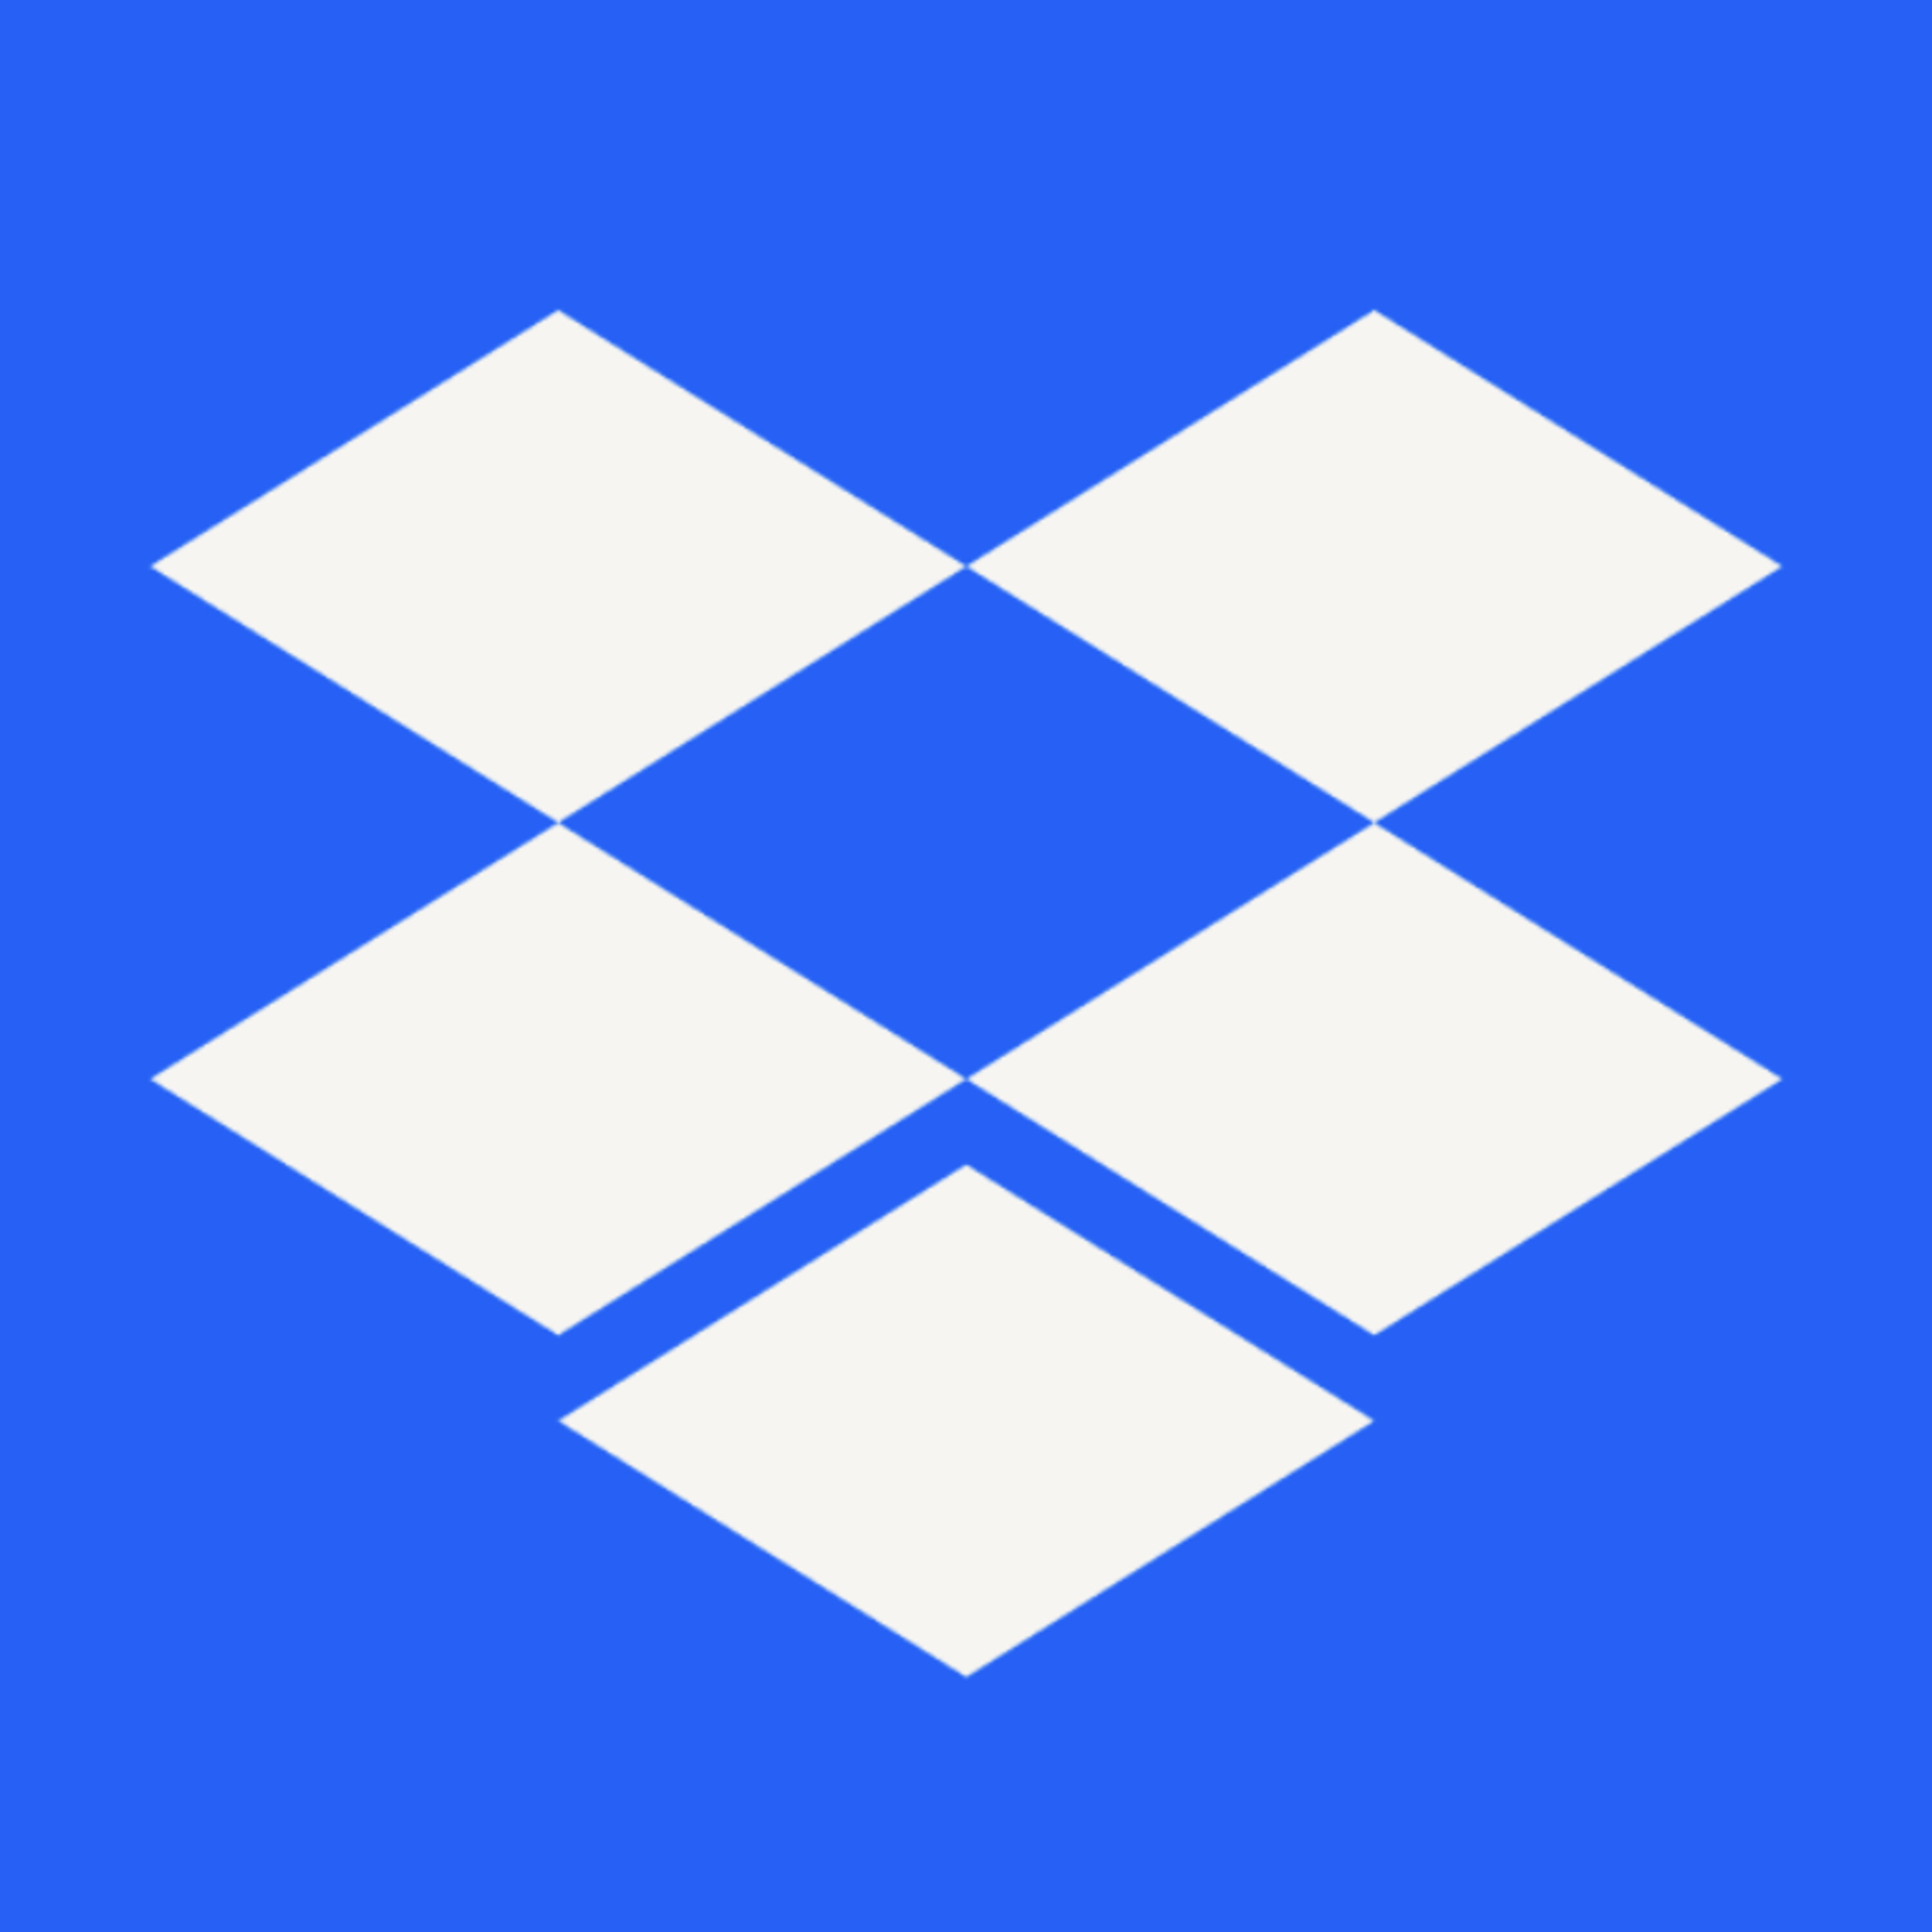 Dropbox: What’s going on up there? (PREVIEW)